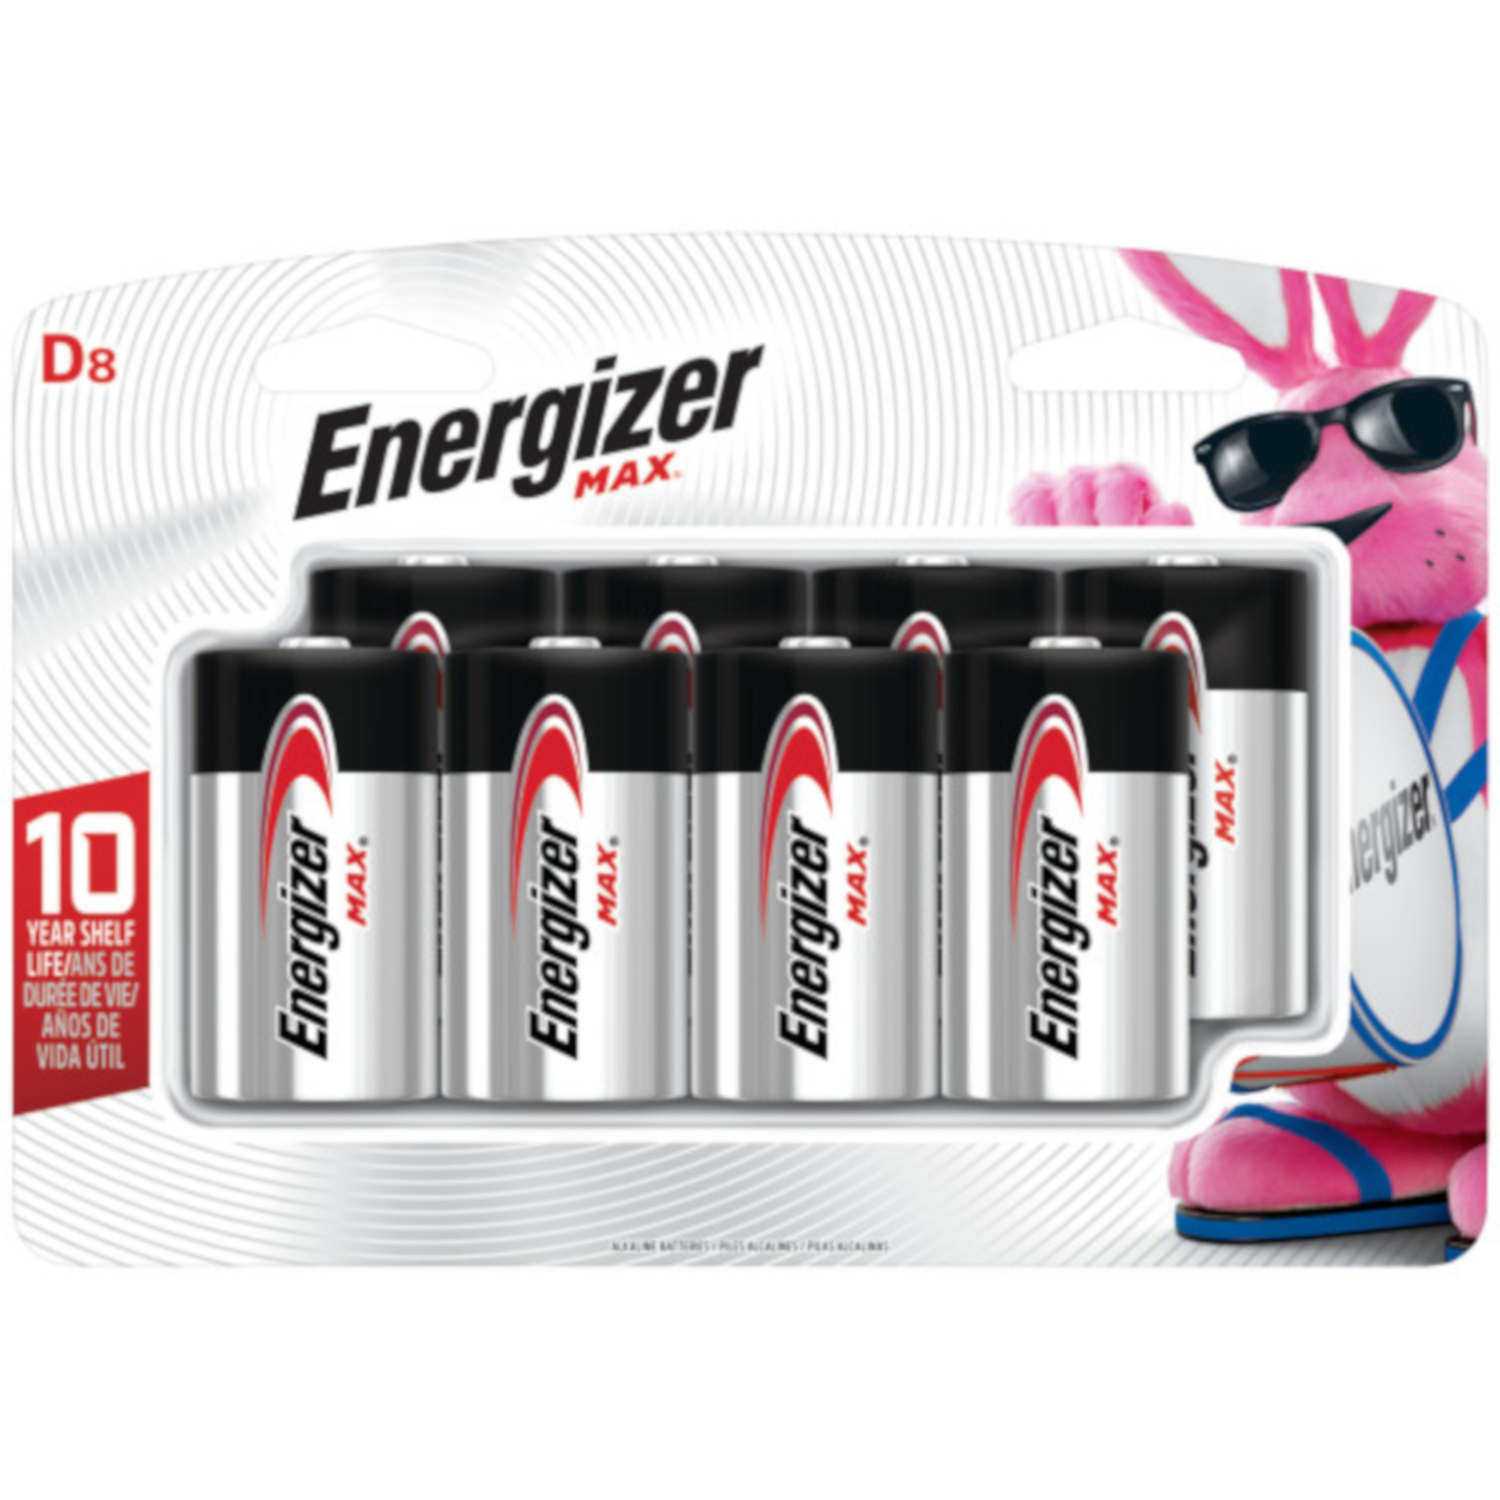 Photos - Household Switch Energizer Max D Alkaline Batteries 8 pk Carded E95BP-8H 